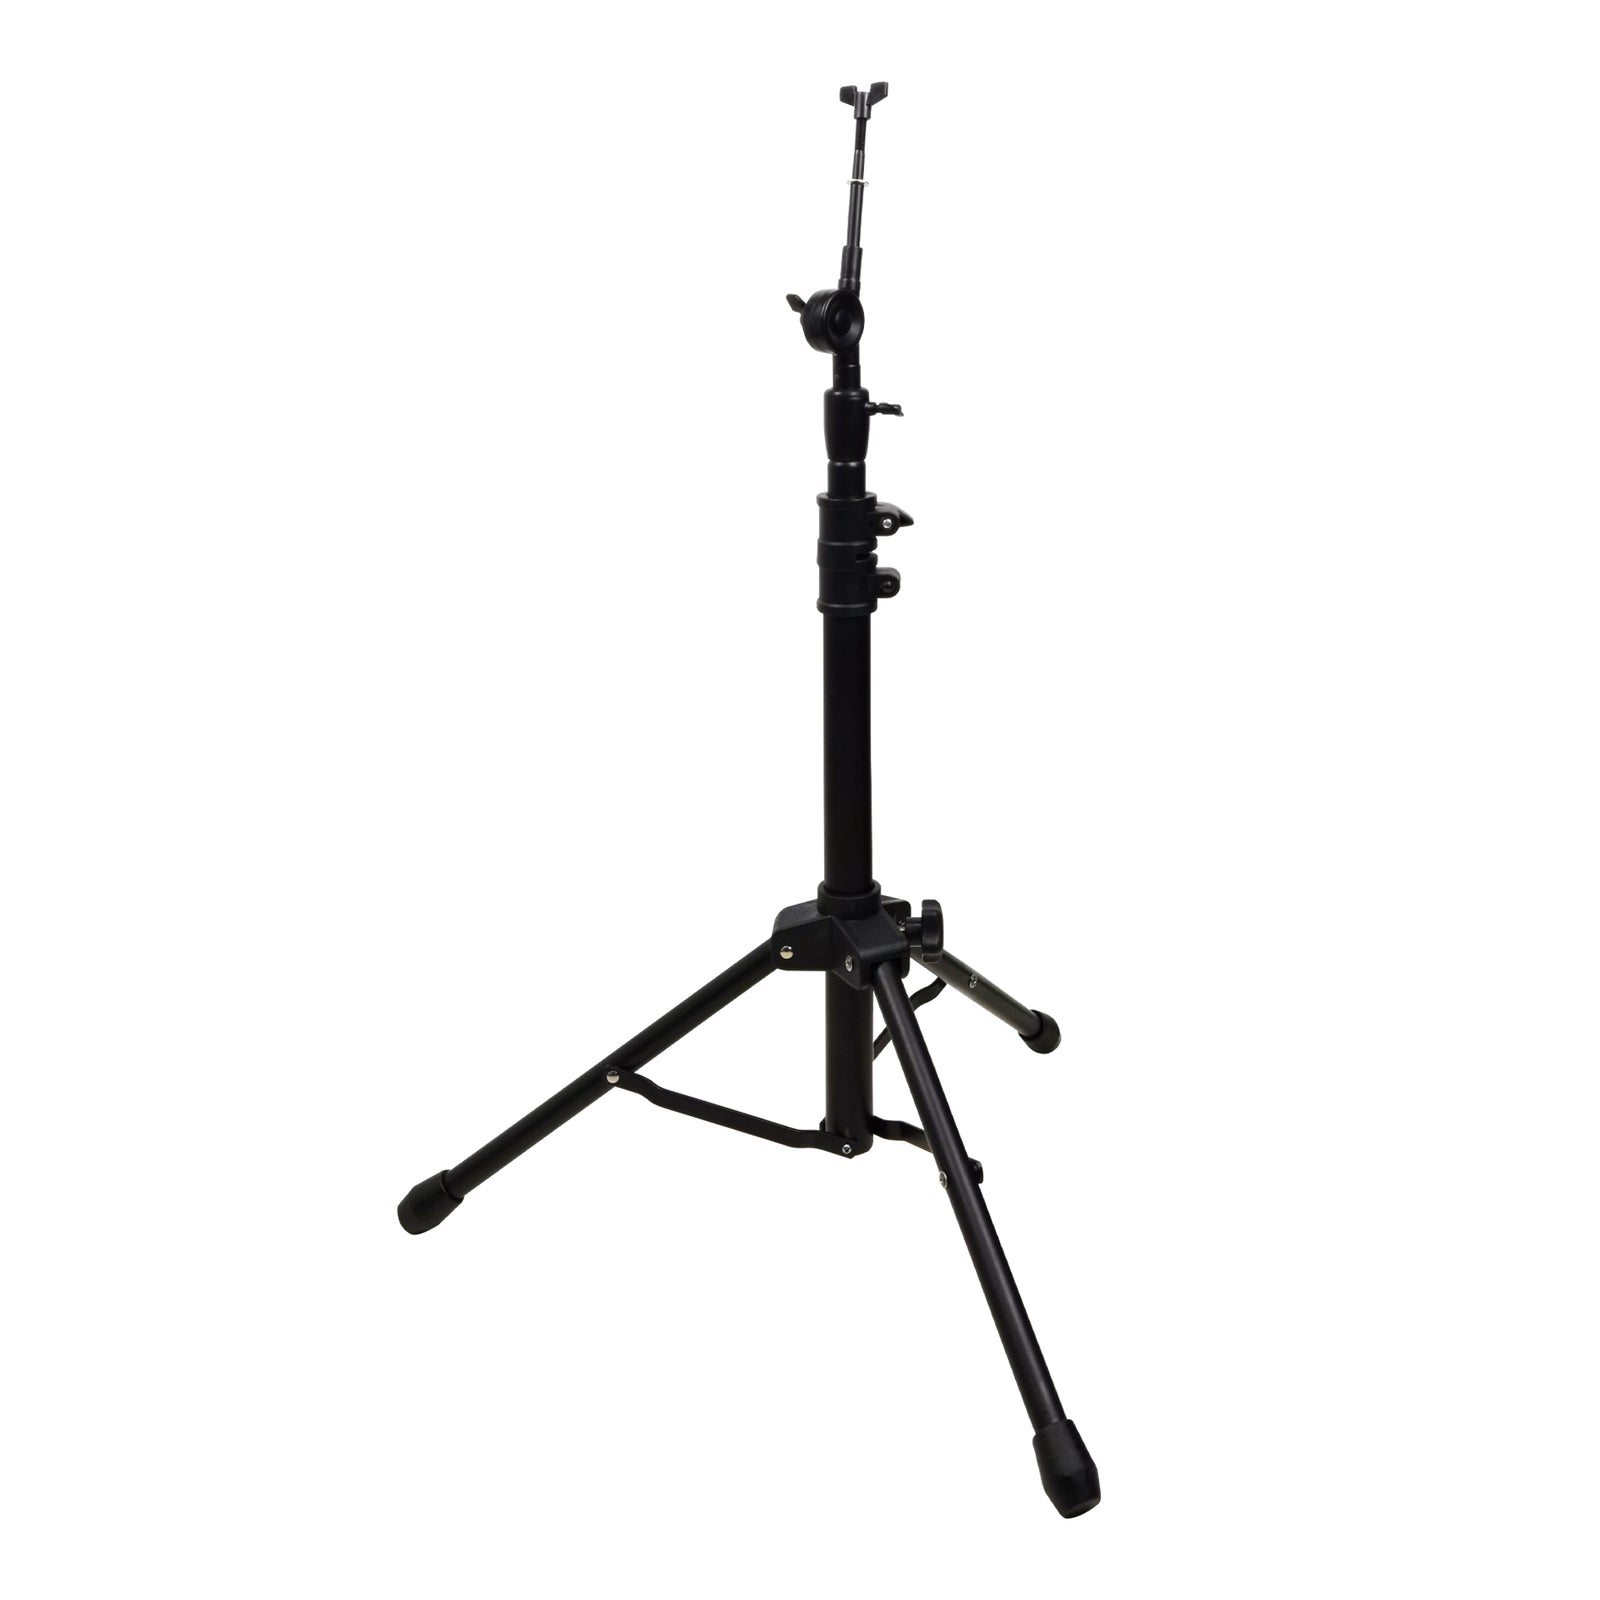 DPSC-1 Drum Stand for Single Portable Drum Pad